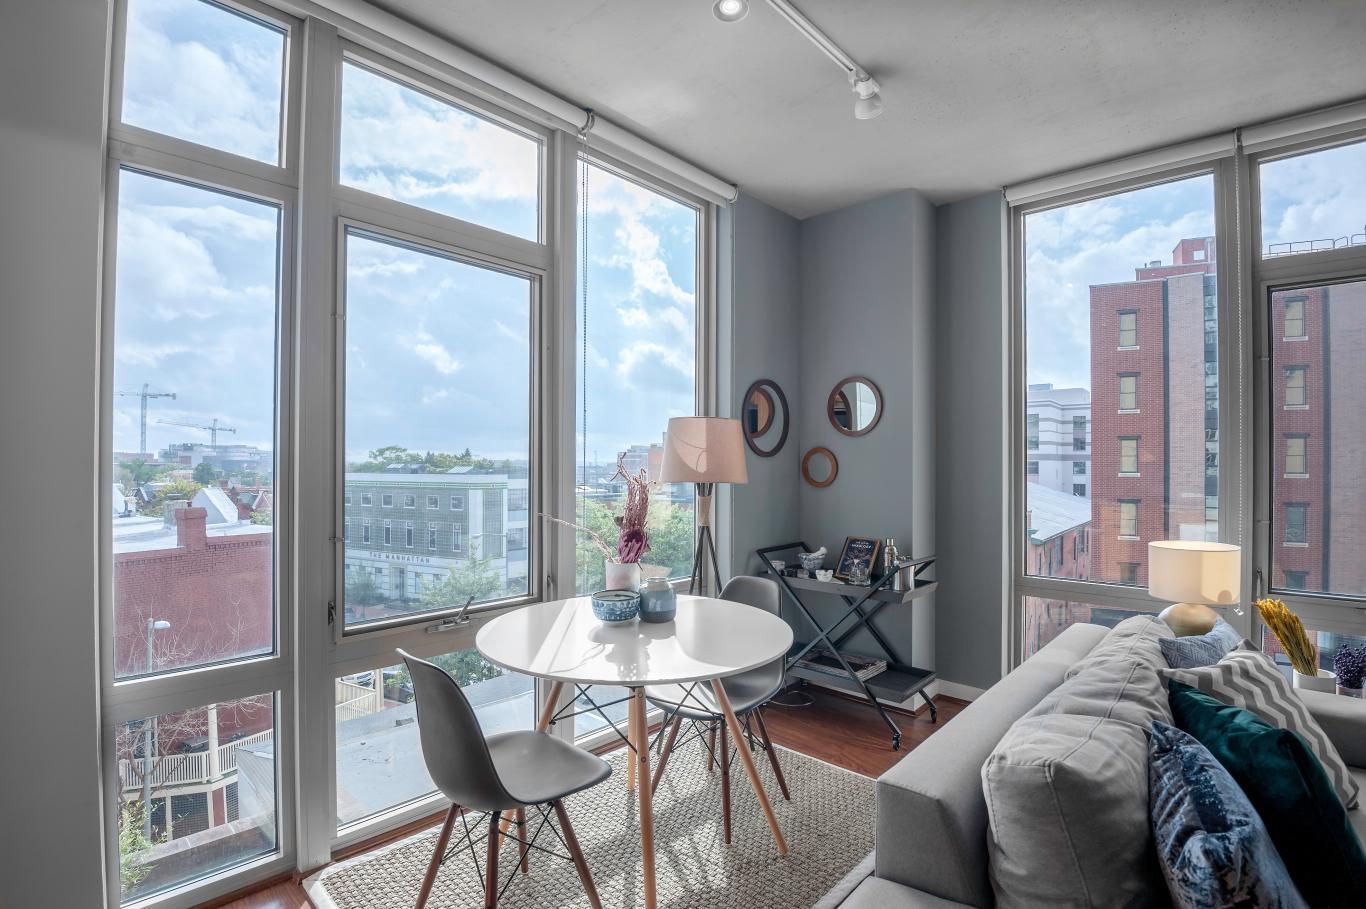 There is a white table and two grey chairs near a window in a dining area in a Blueground apartment in Washington, D.C. There is also a grey sofa with some green pillows on it.